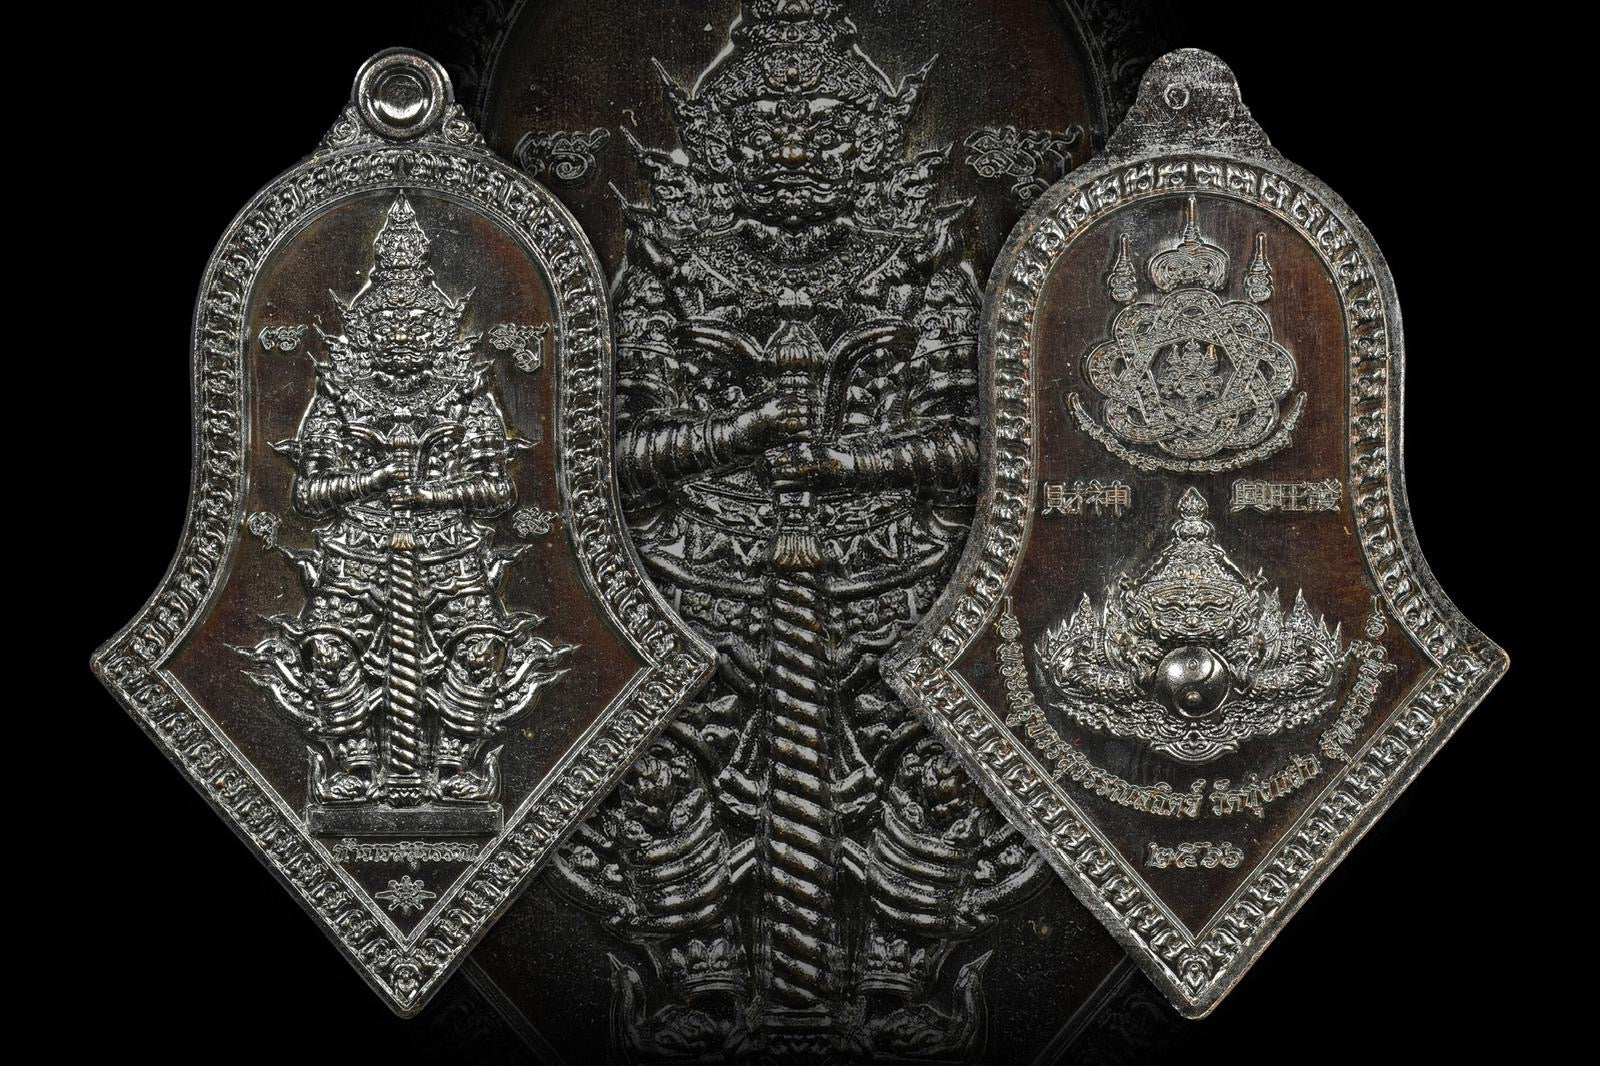 introducing our newest arrival - the blessed Taowesuwan amulet from Luang Phor Kai of Wat Toon Faek. Months of planning and ritual have gone into creating this powerful piece to bring prosperity, wealth and protection to the wearer.